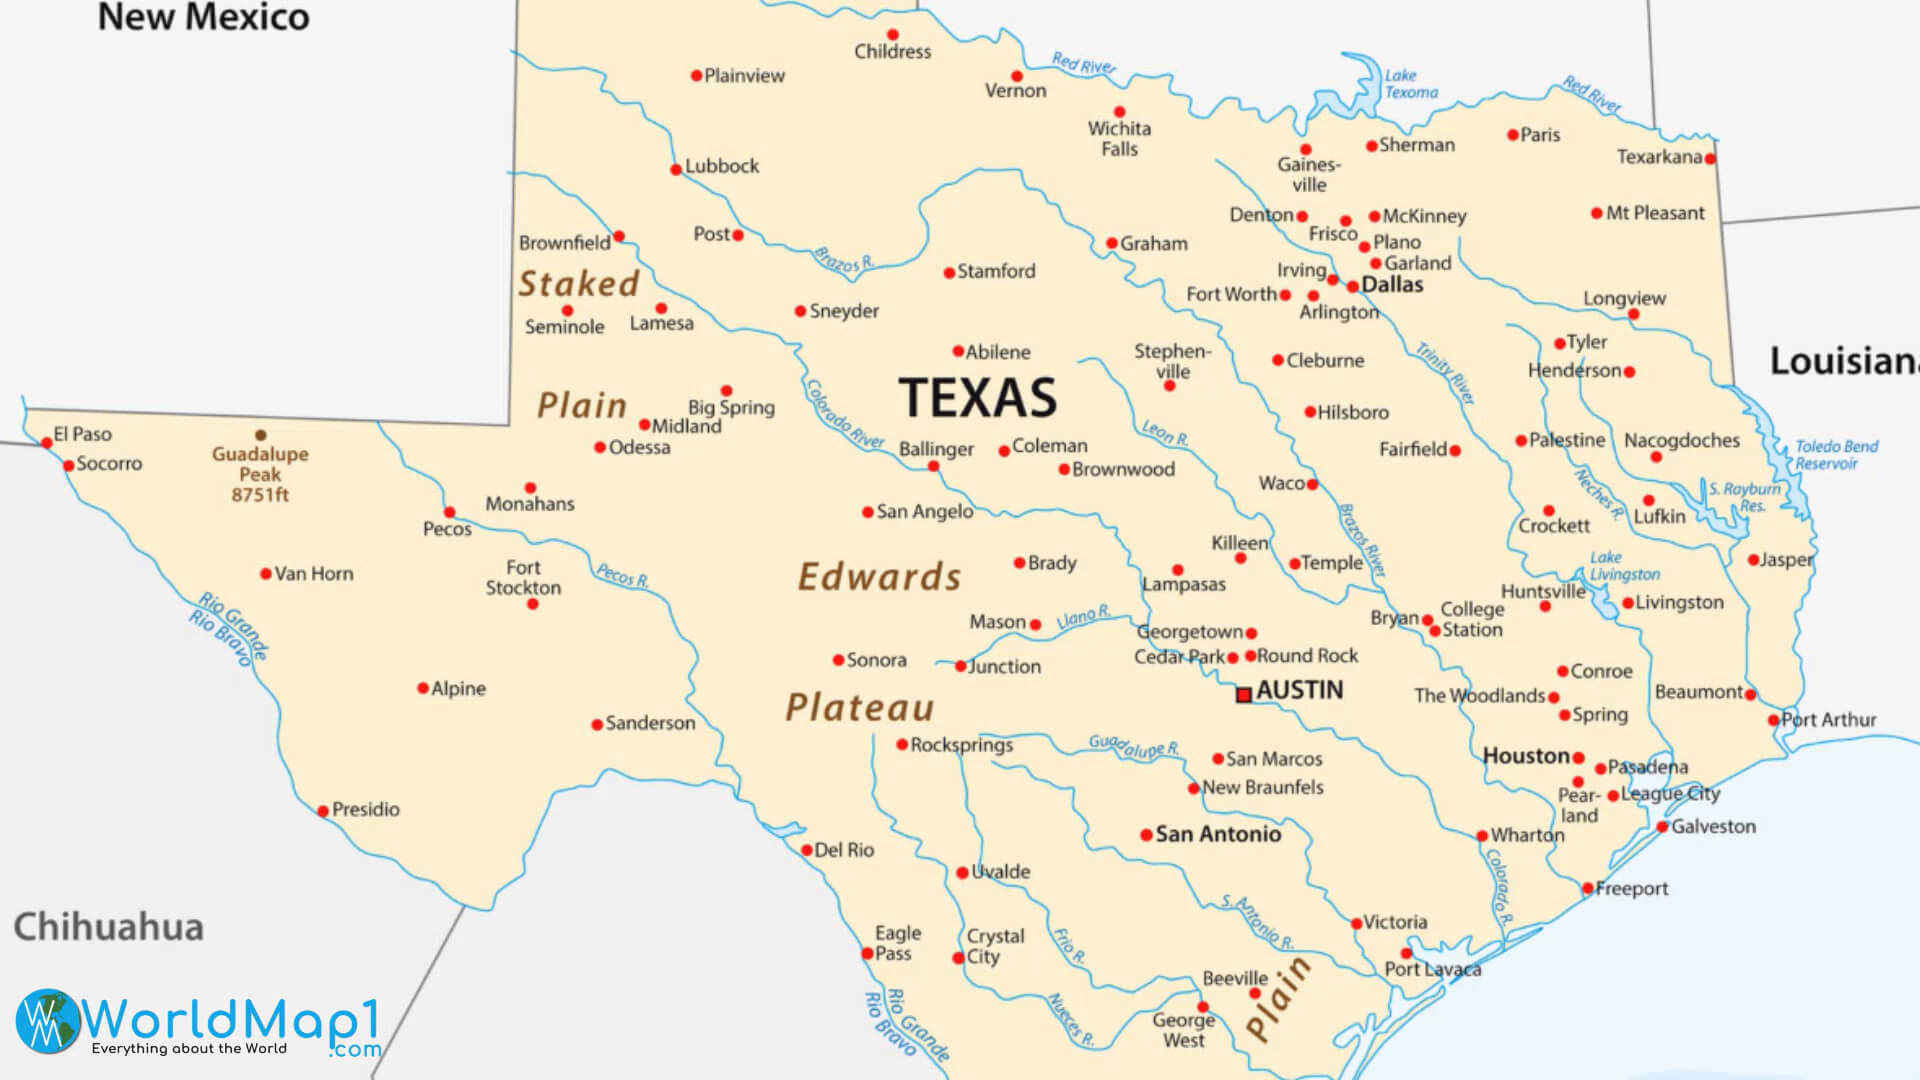 Texas Main Cities and Rivers Map